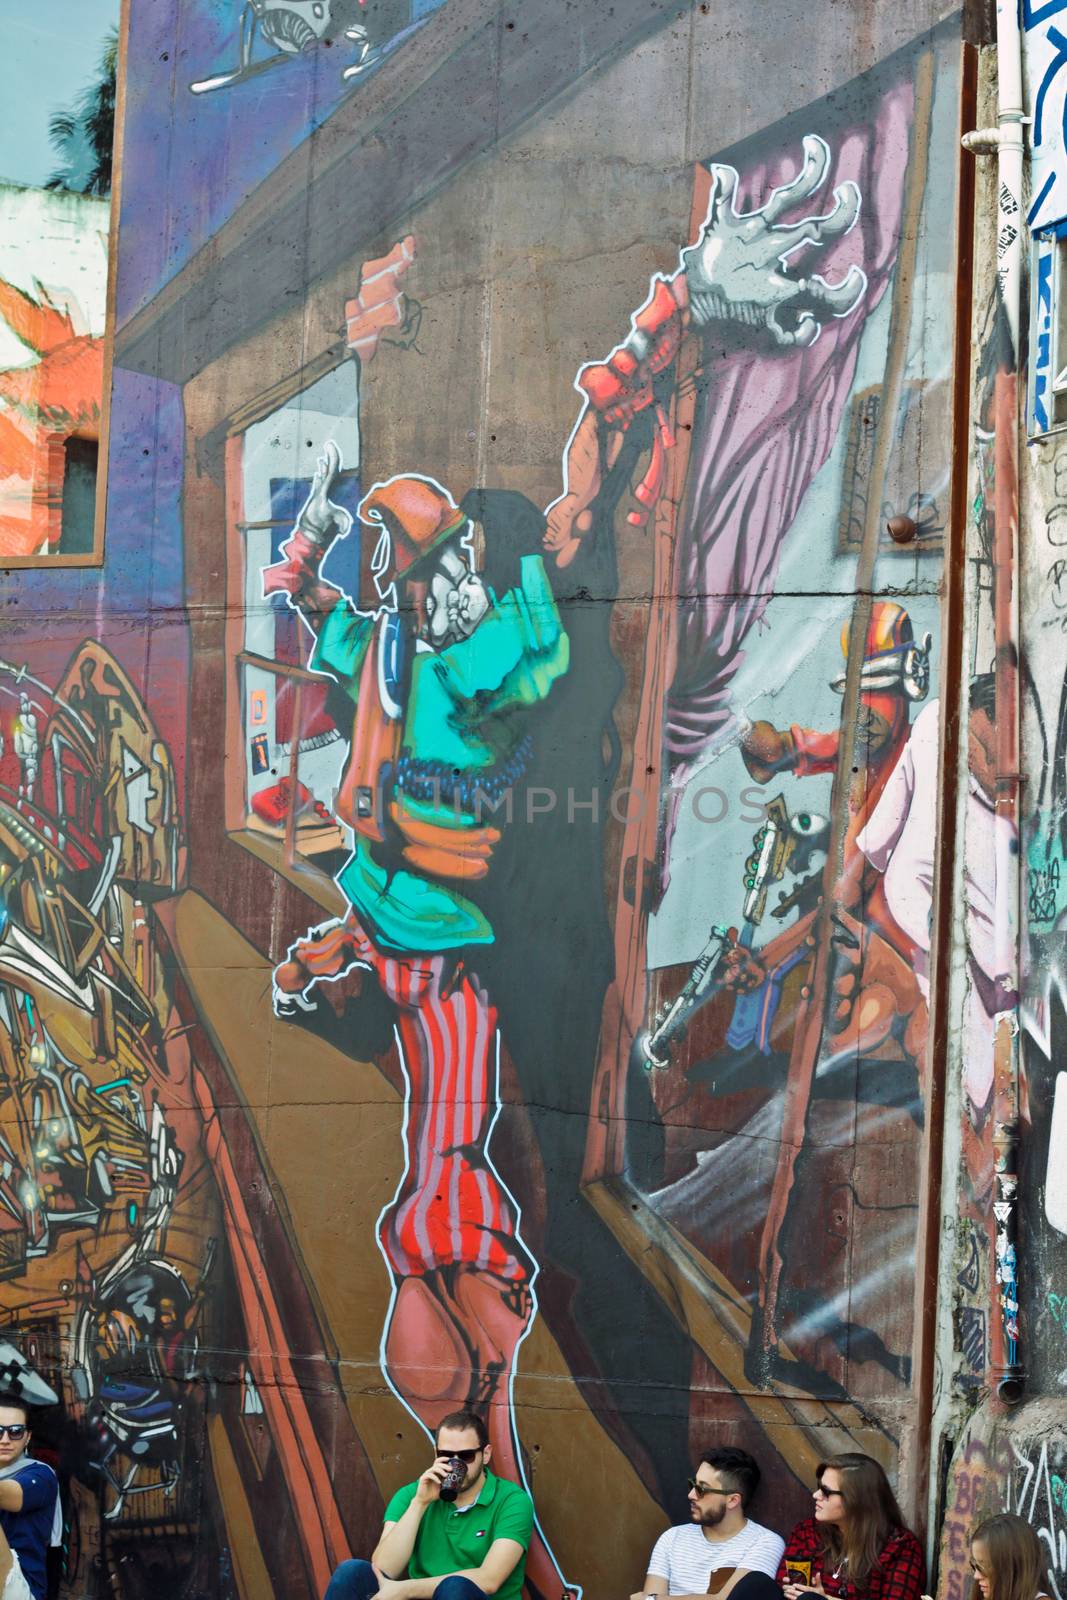 Sao Paulo, Brazil July 18, 2015: Unidentified group of people in front of graffiti of unidentified artist on the wall of the Batman alley in Sao Paulo Brazil.